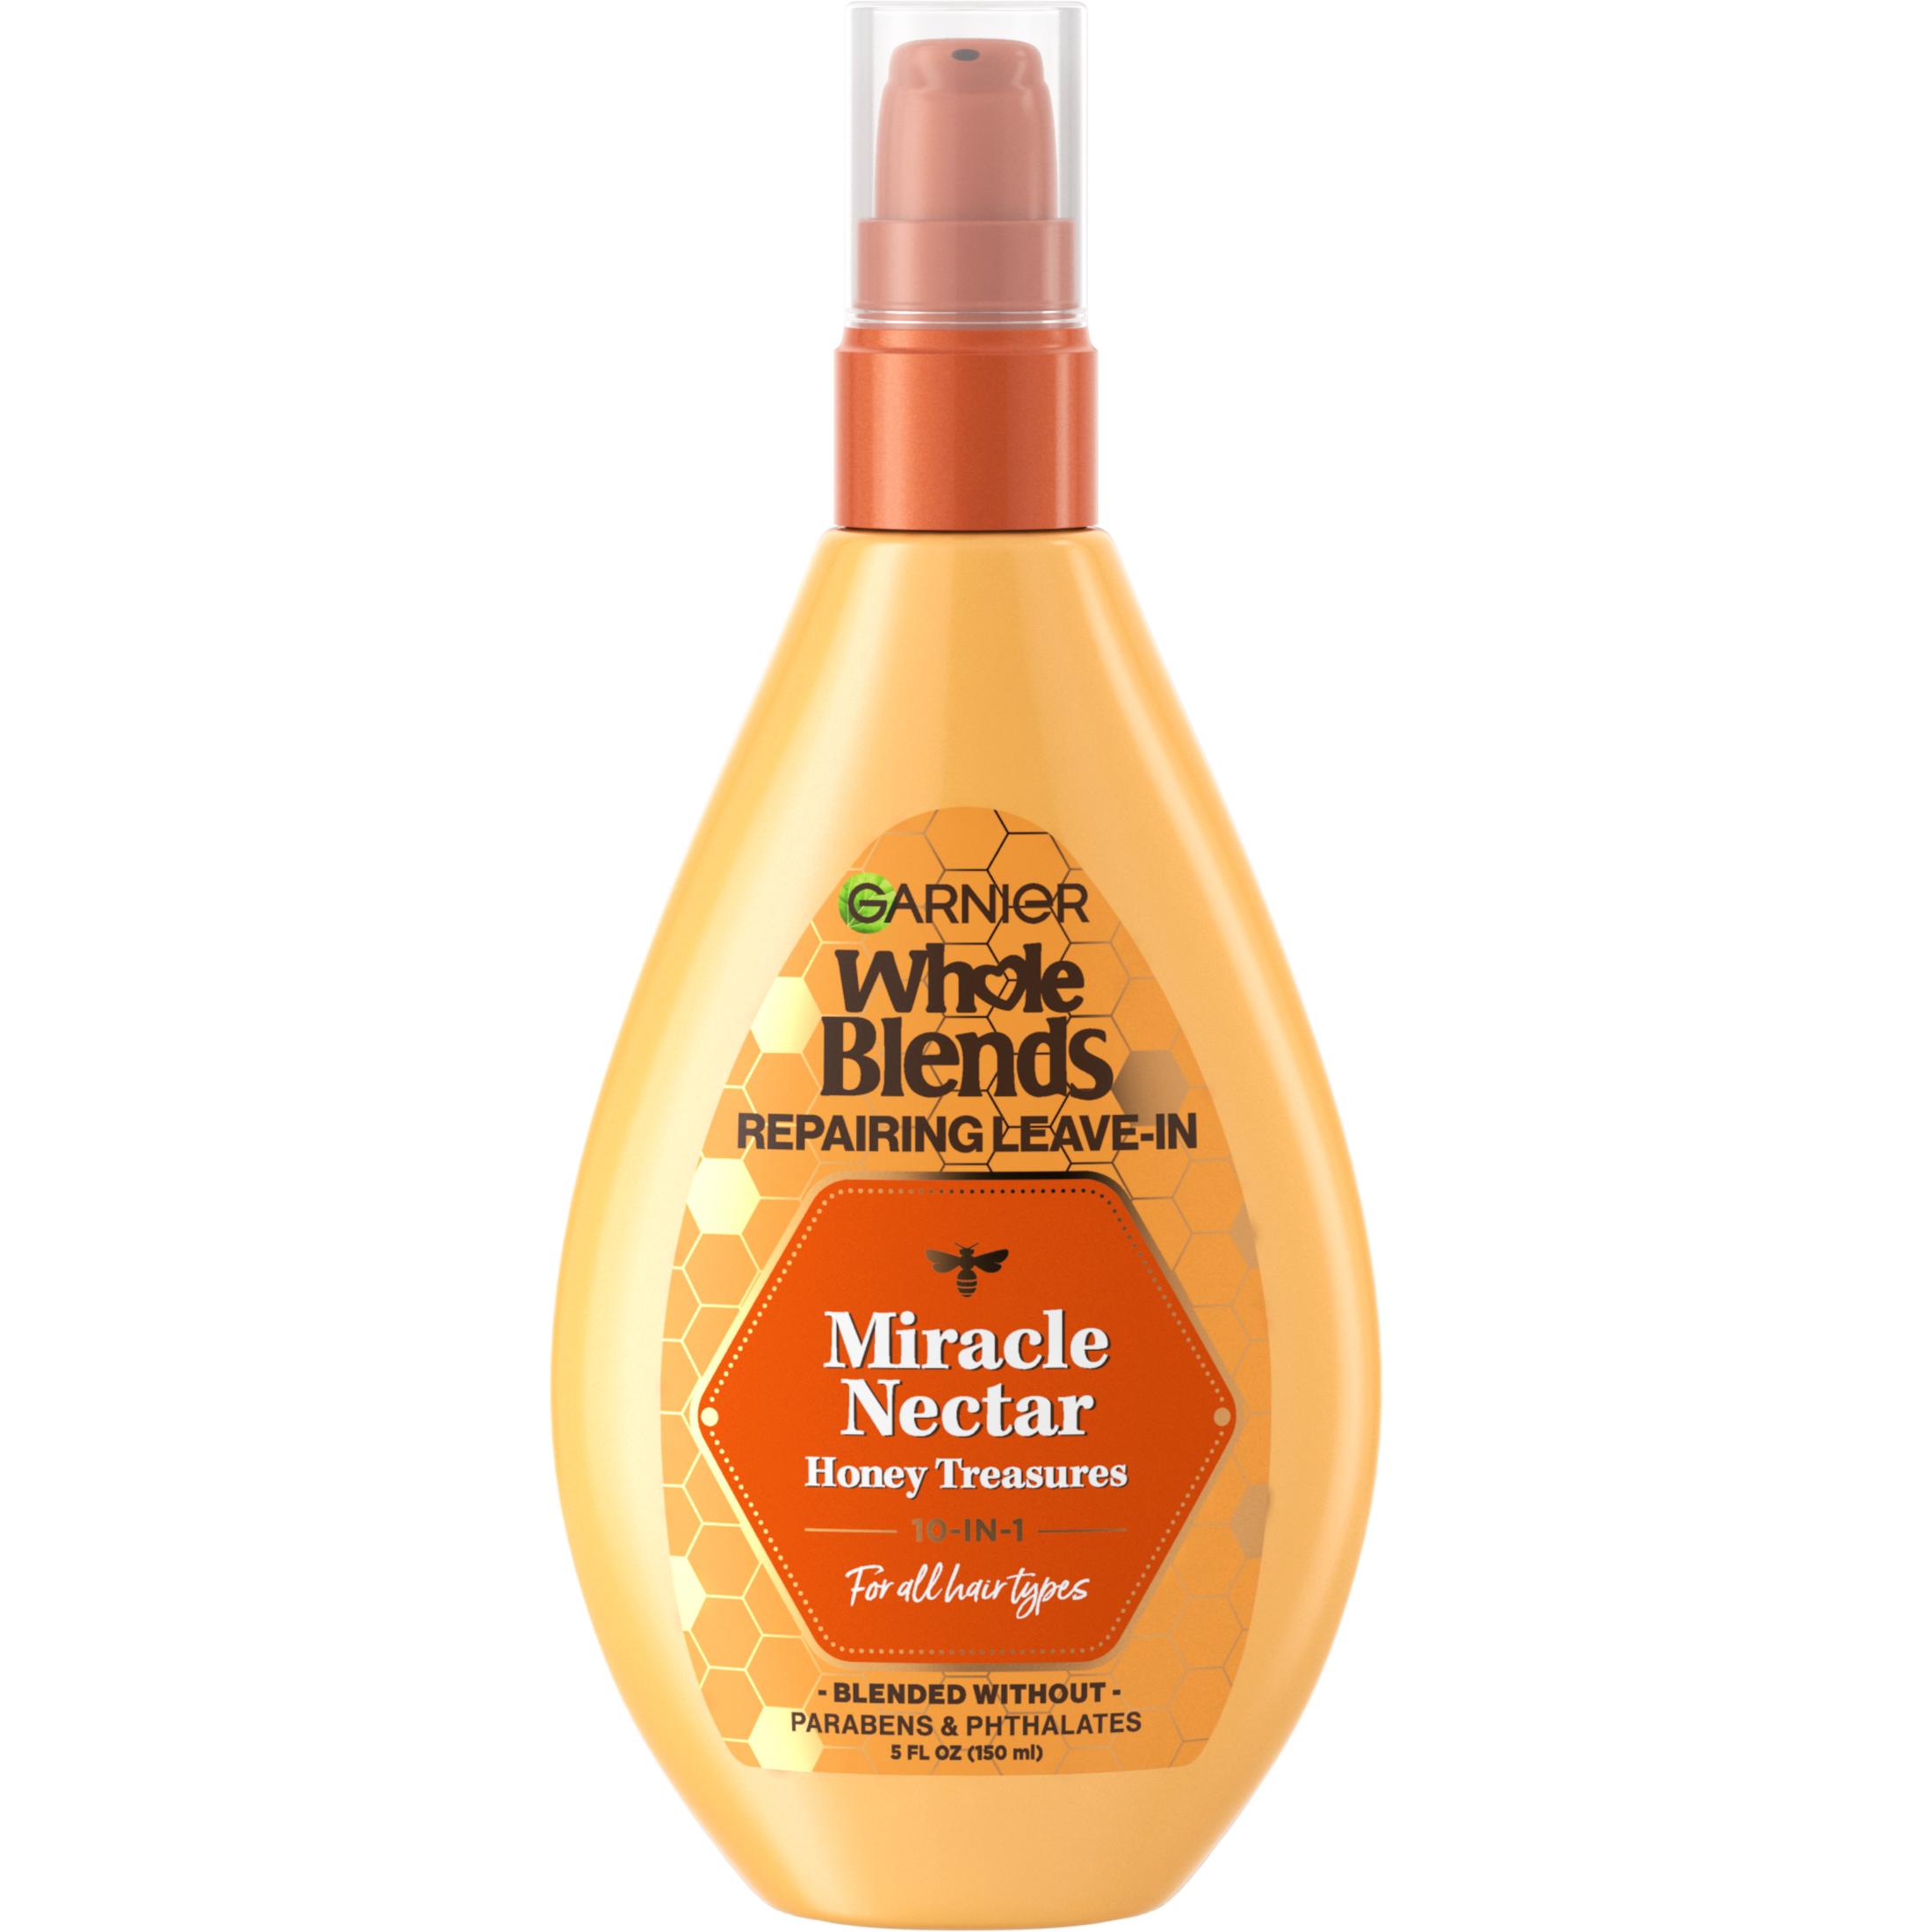 Garnier Whole Blends Honey Treasures Repairing Leave In Conditioner with Honey, 5 fl oz - image 1 of 10